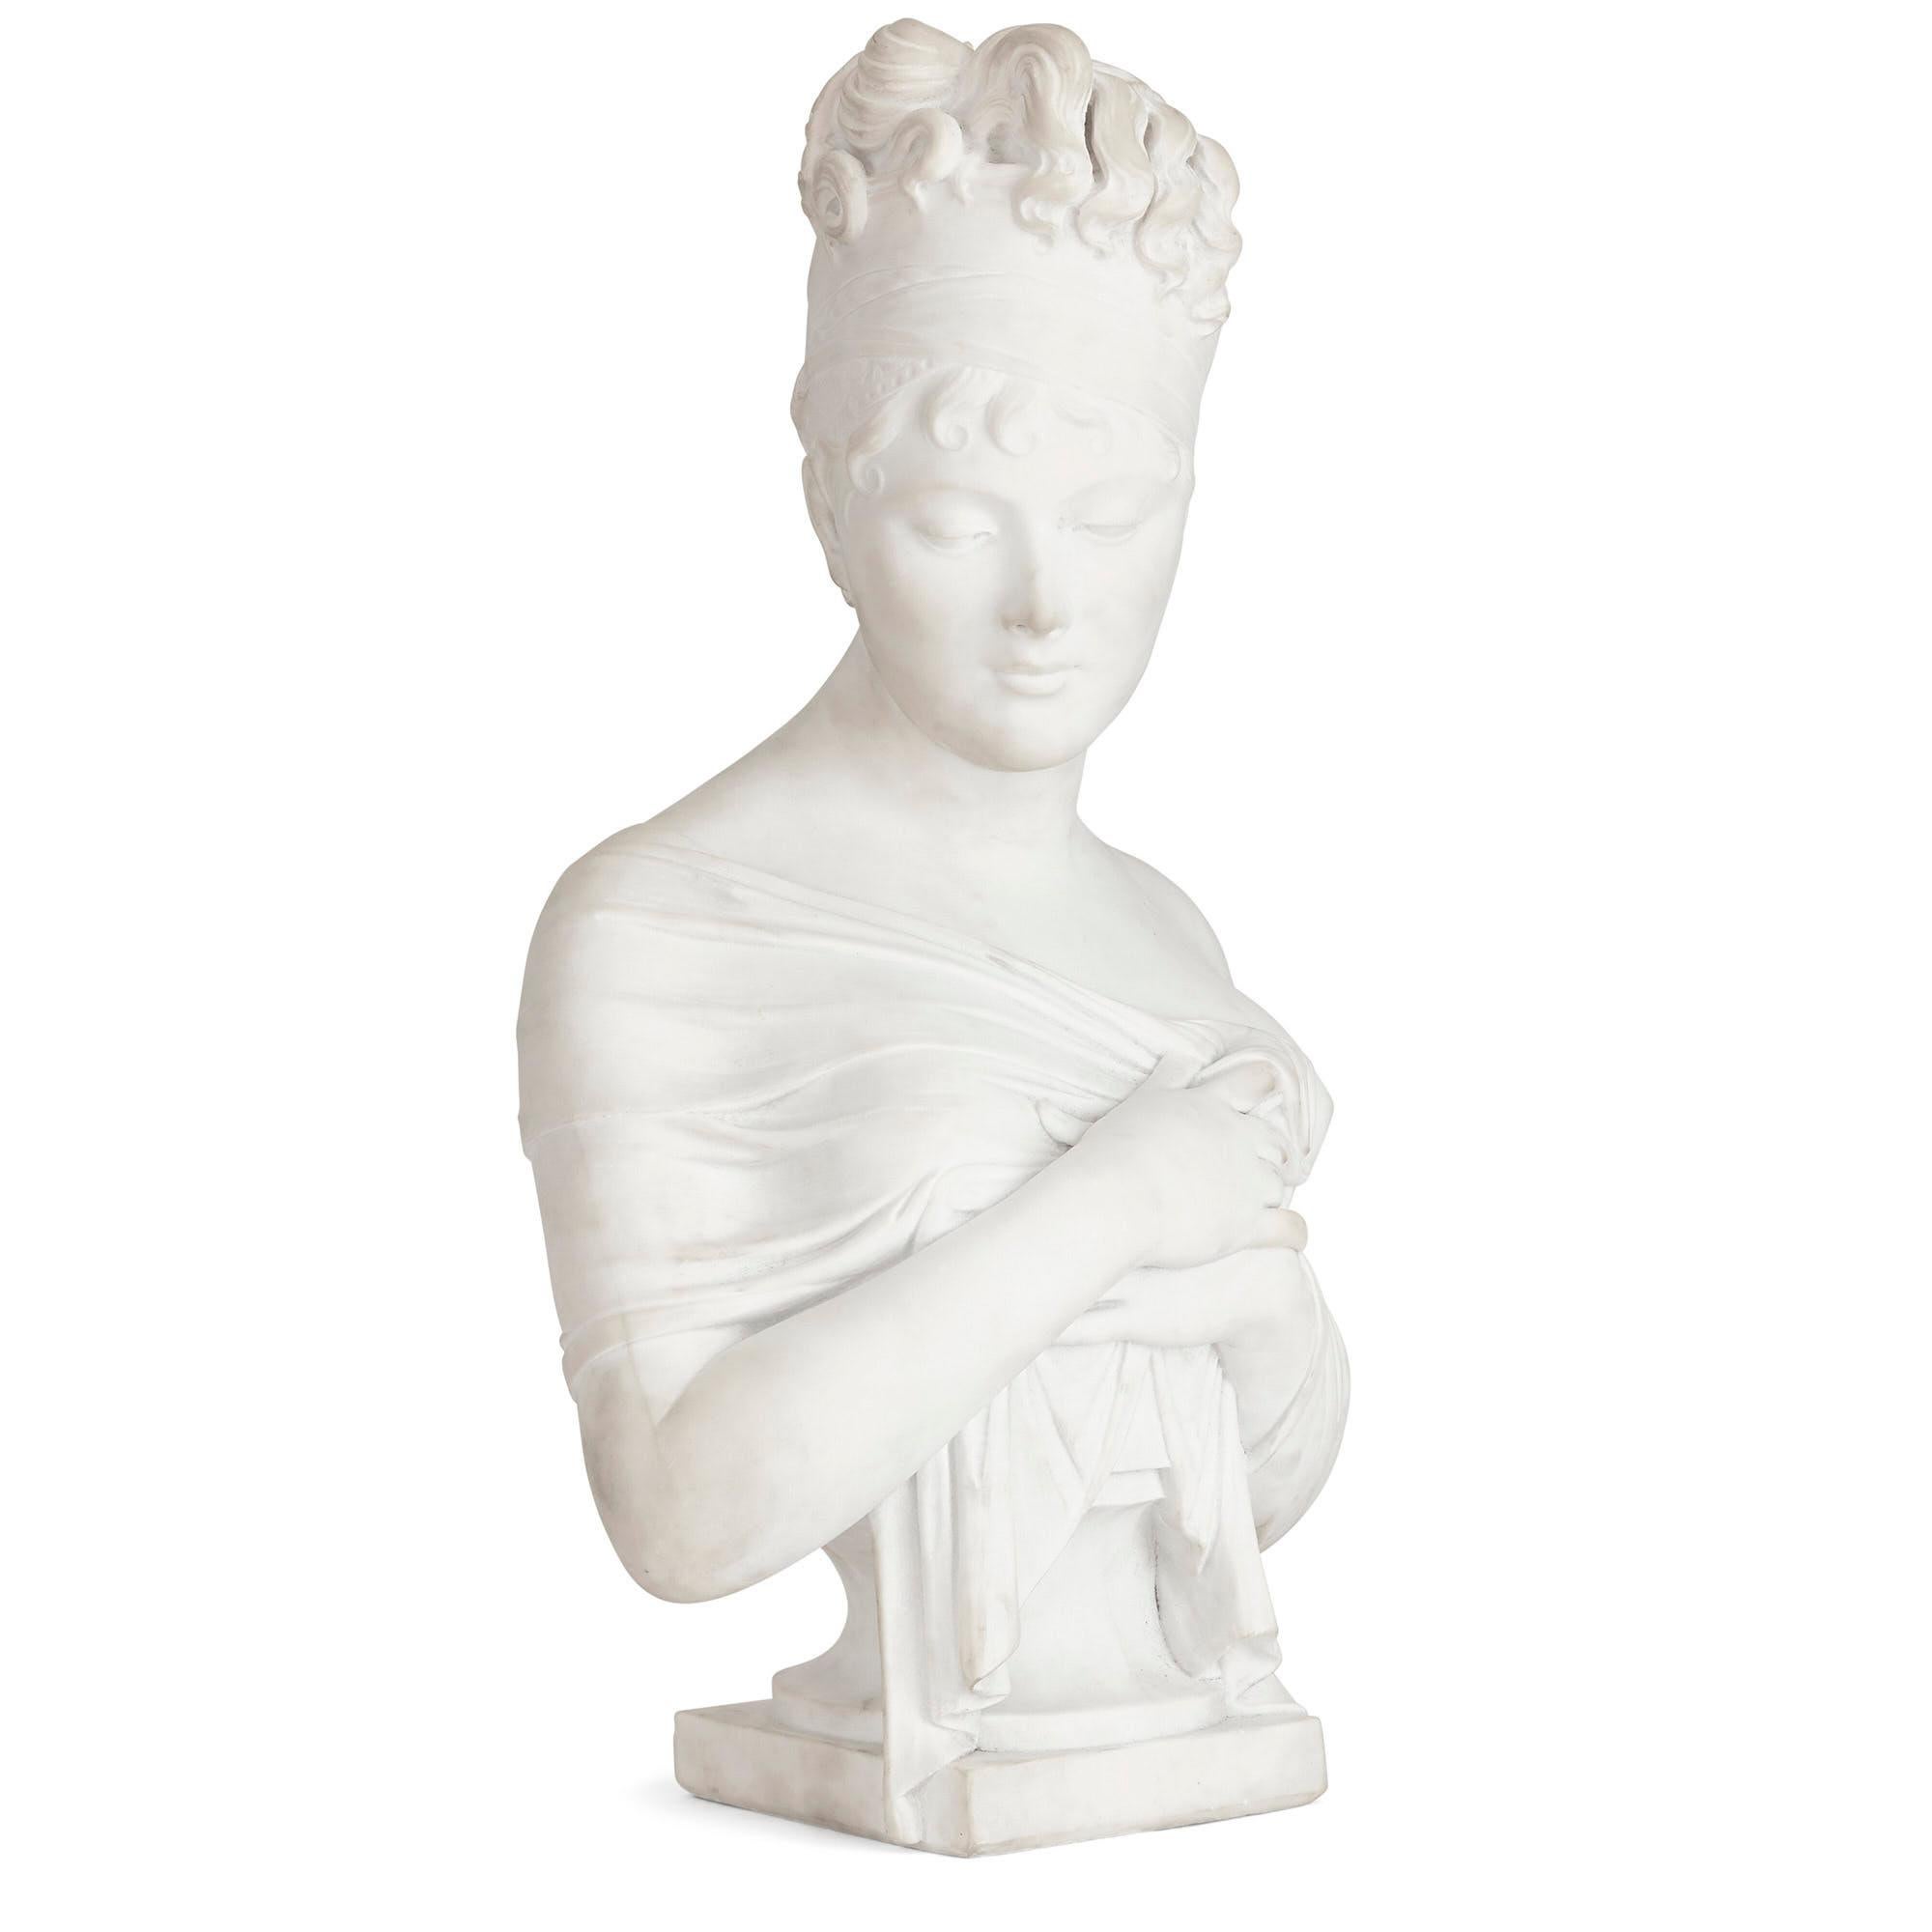 Neoclassical style marble female bust after Joseph Chinard
French, late 19th century
Measures: Height 63cm, width 33cm, depth 20cm

Portraying Madame Récamier, a leading advocate of the neoclassical style in early 19th century France, this